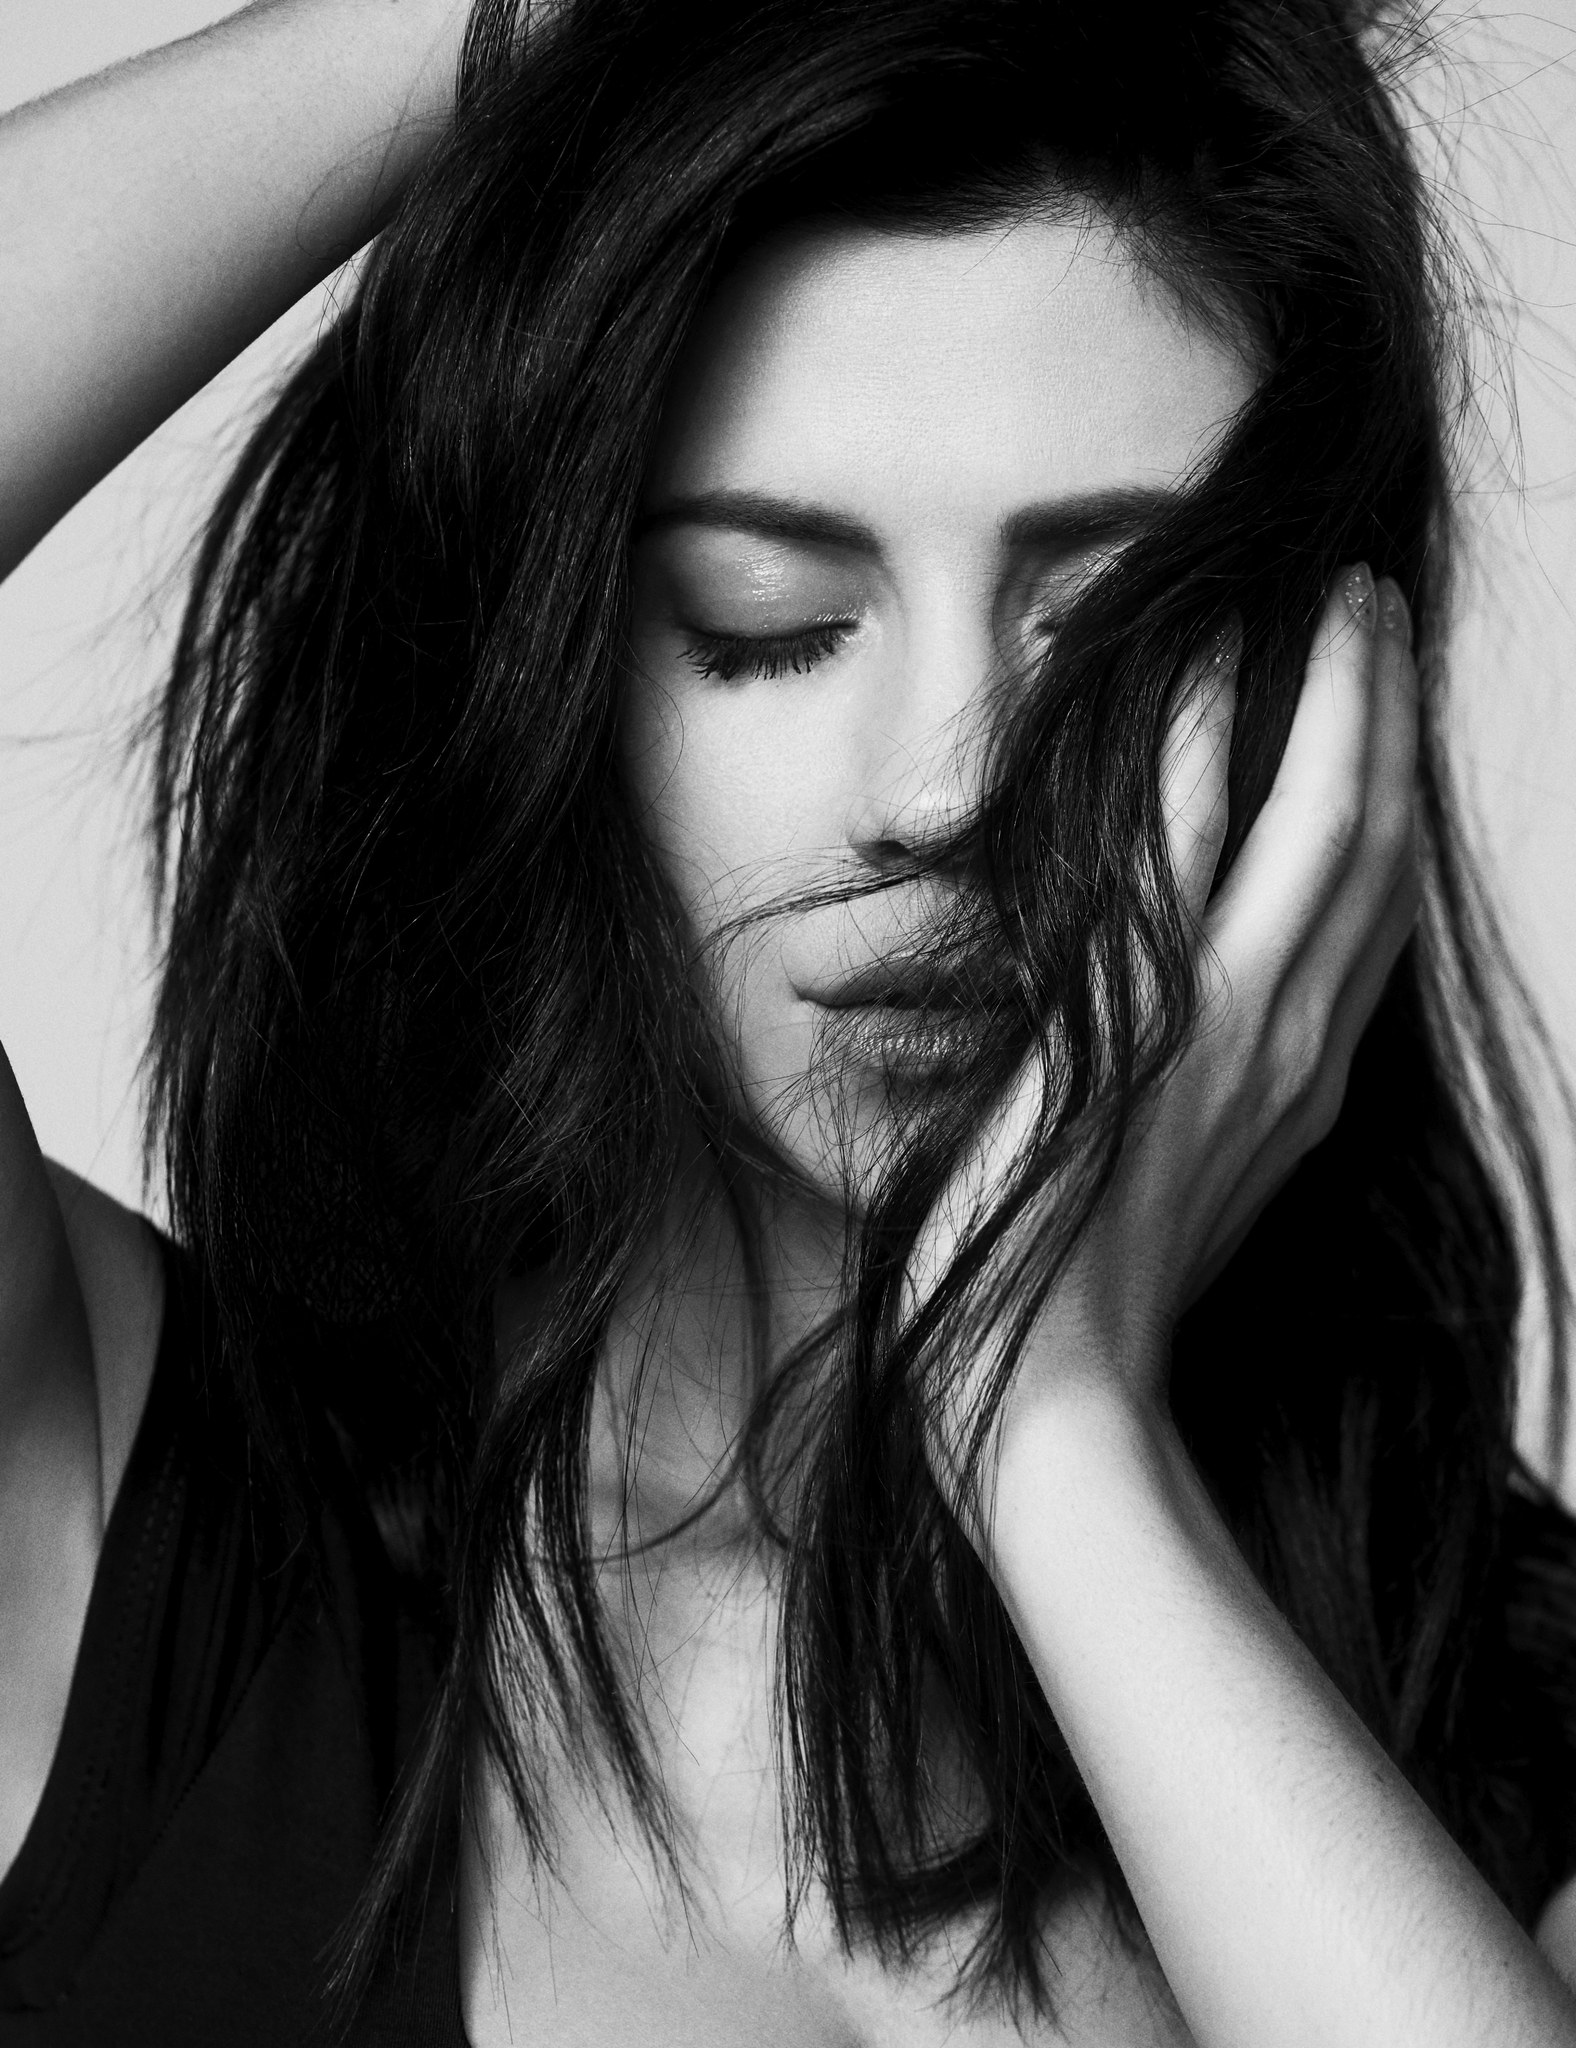 People 1576x2048 Marina and the Diamonds women monochrome singer face long hair closed eyes